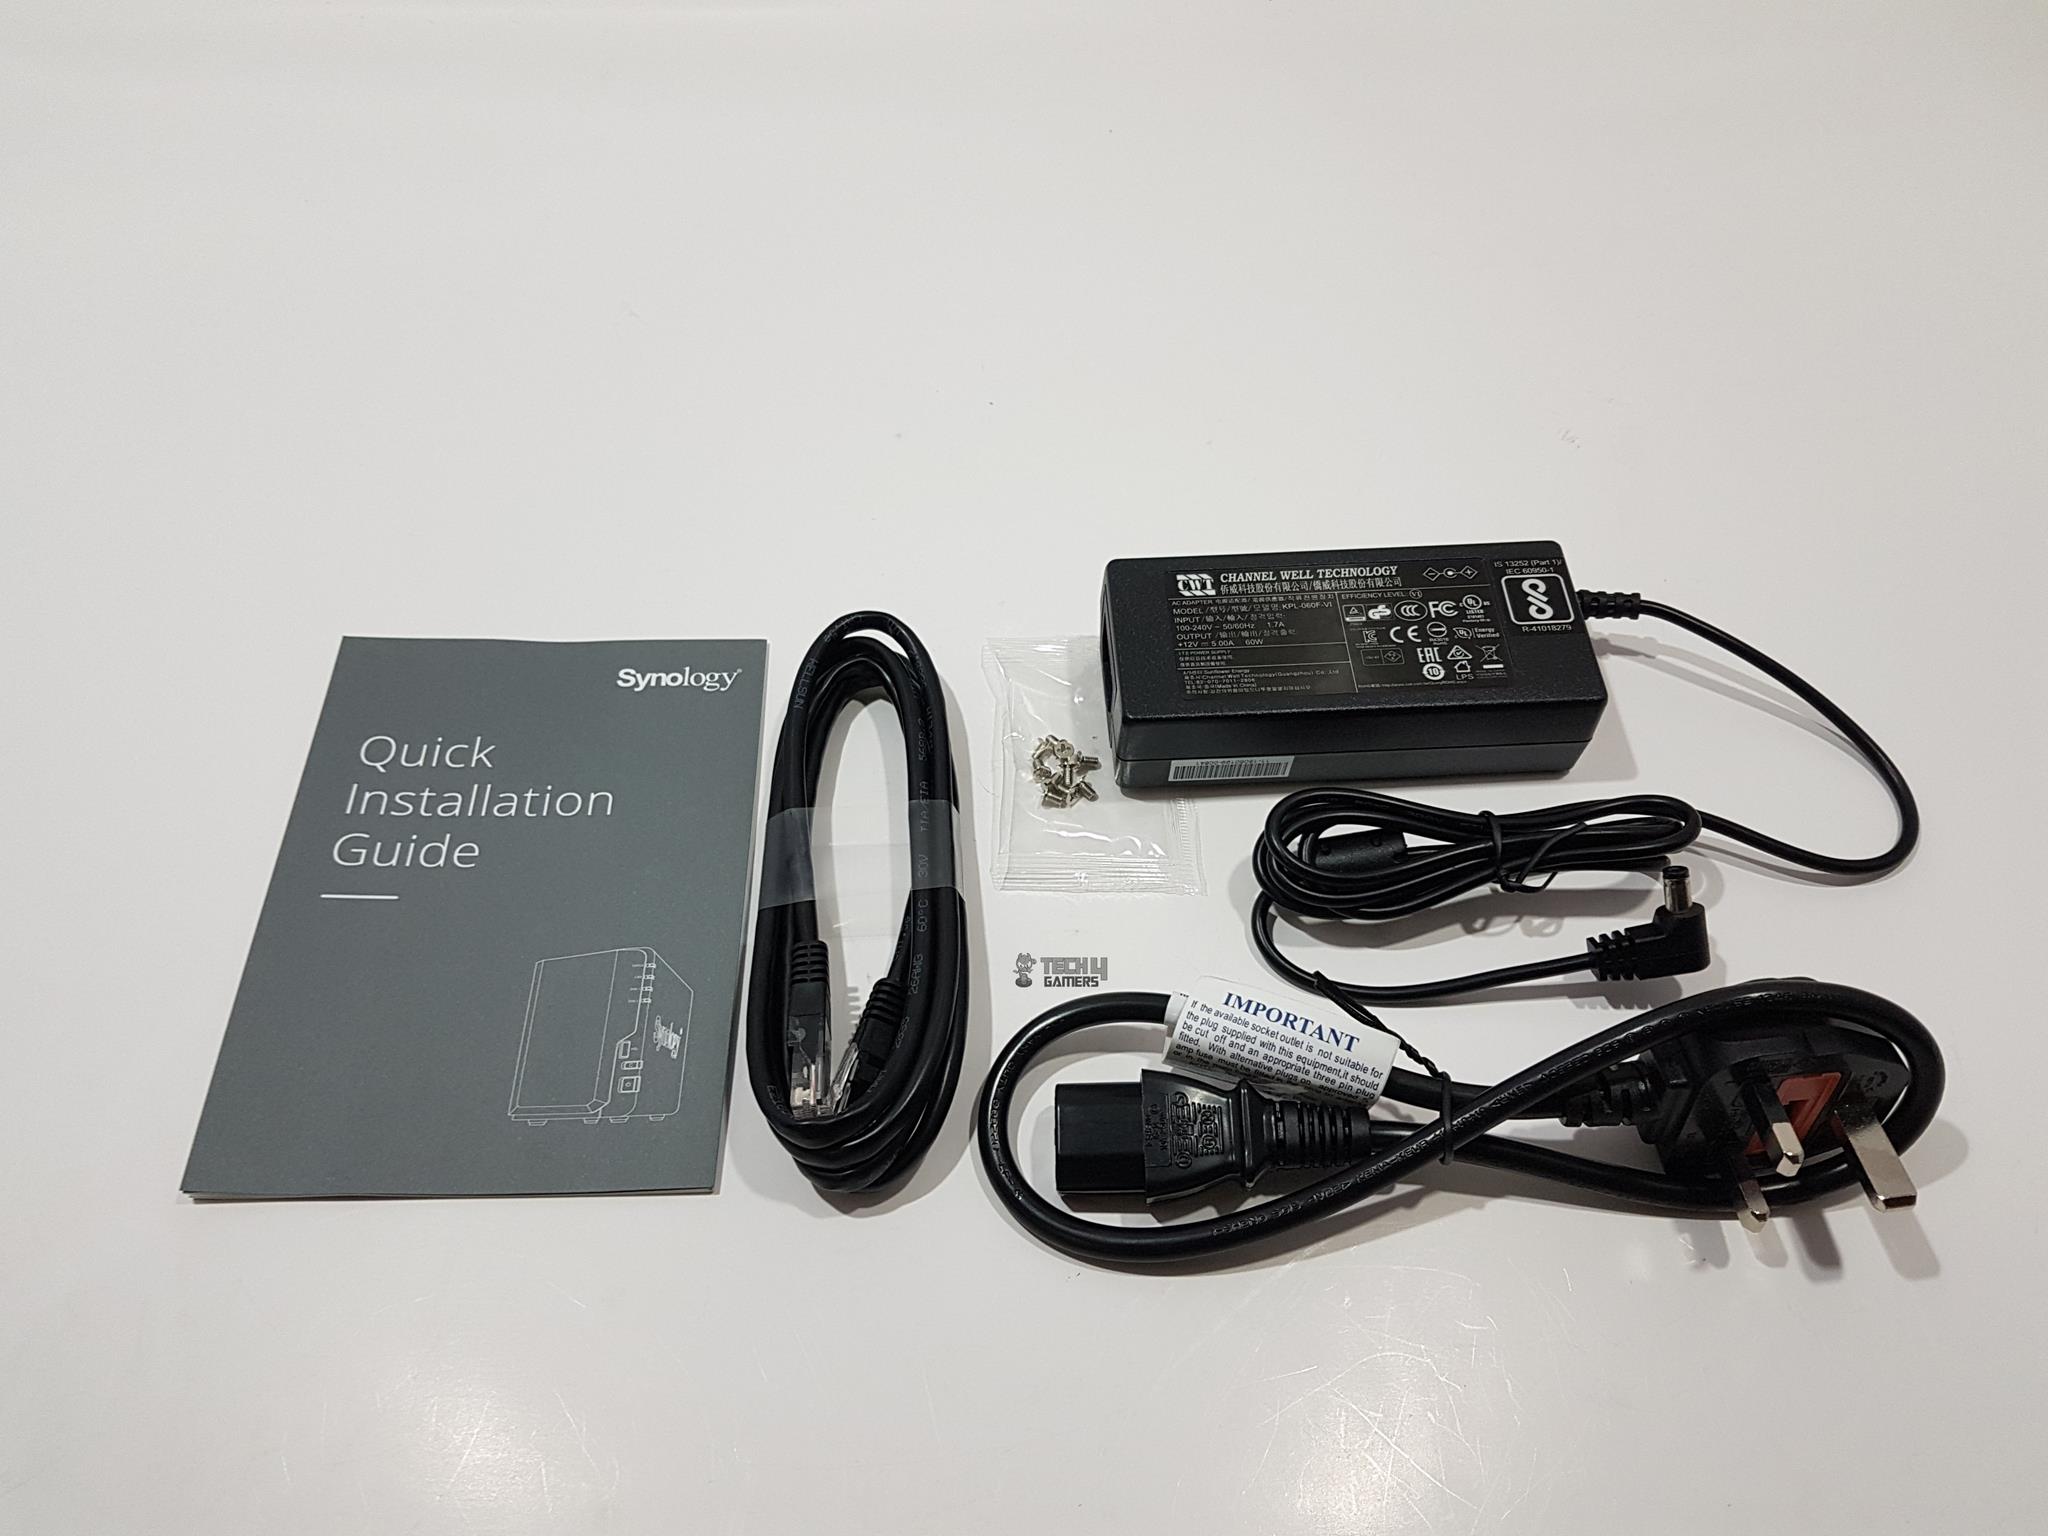 Diskstation DS218+ Accessories and Contents